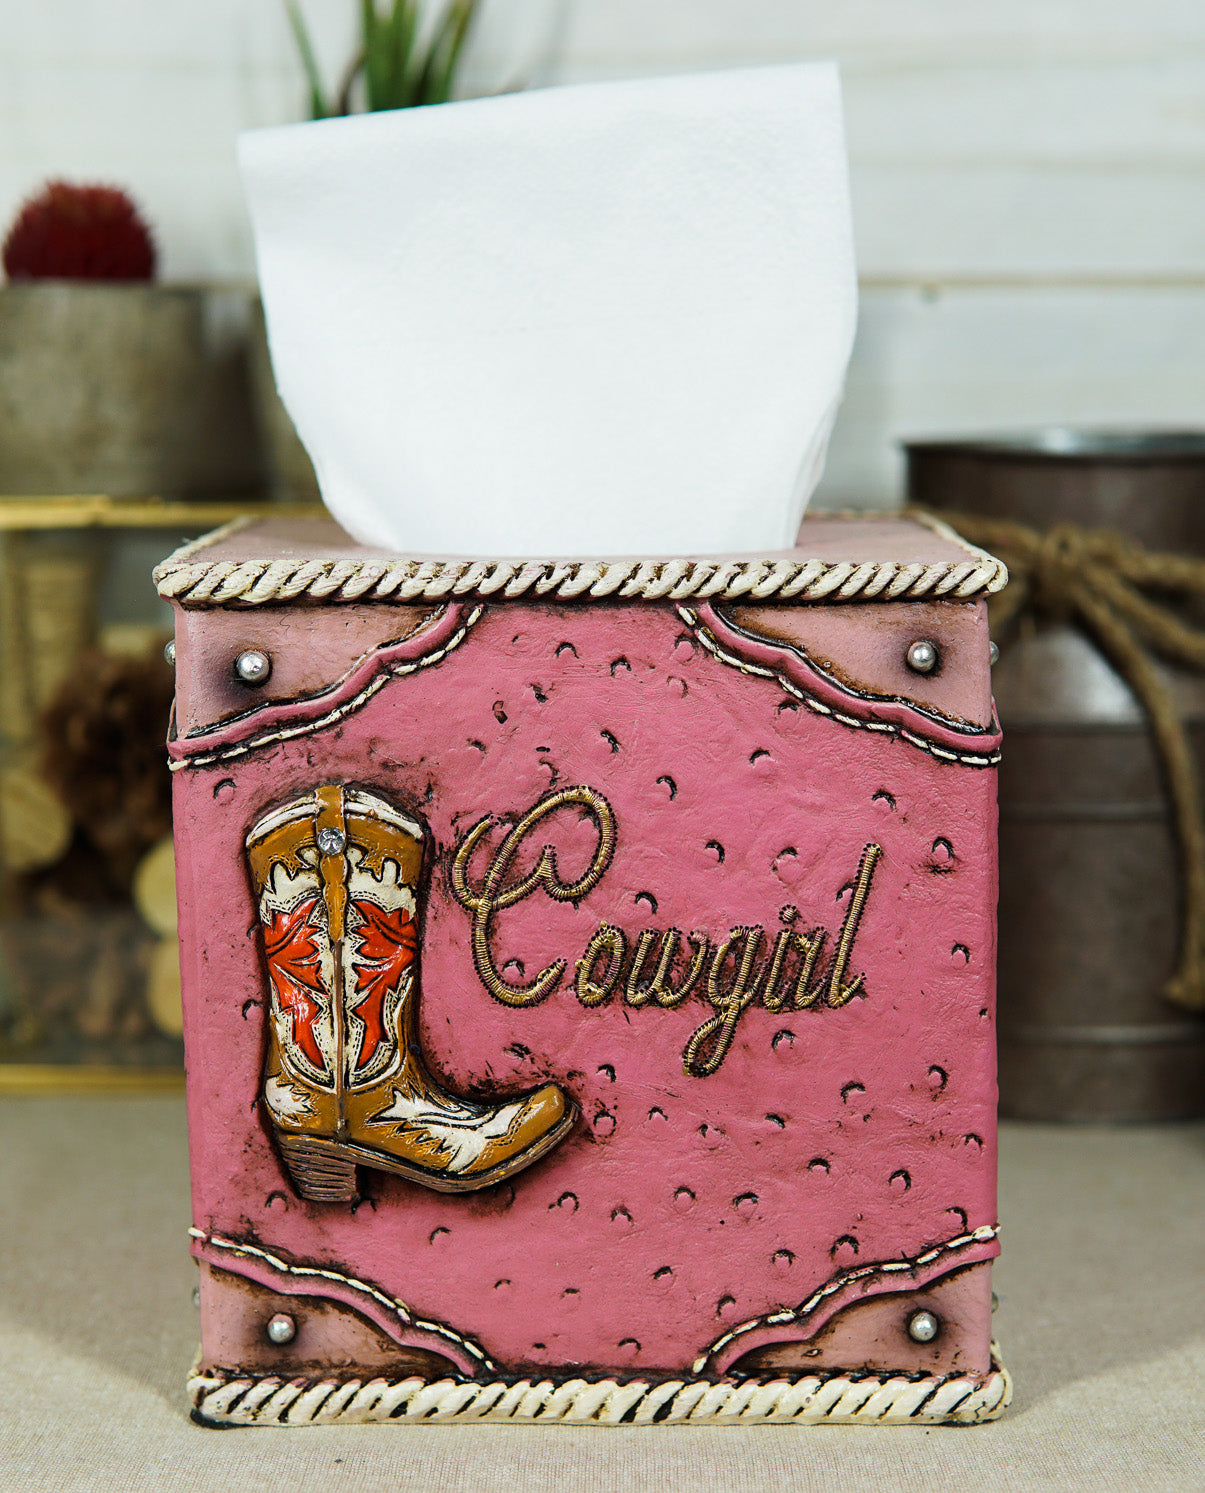 Ebros Gift Western Cowgirl Boot with Horseshoe Fabulous Pink Tissue Box Cover Sculpture